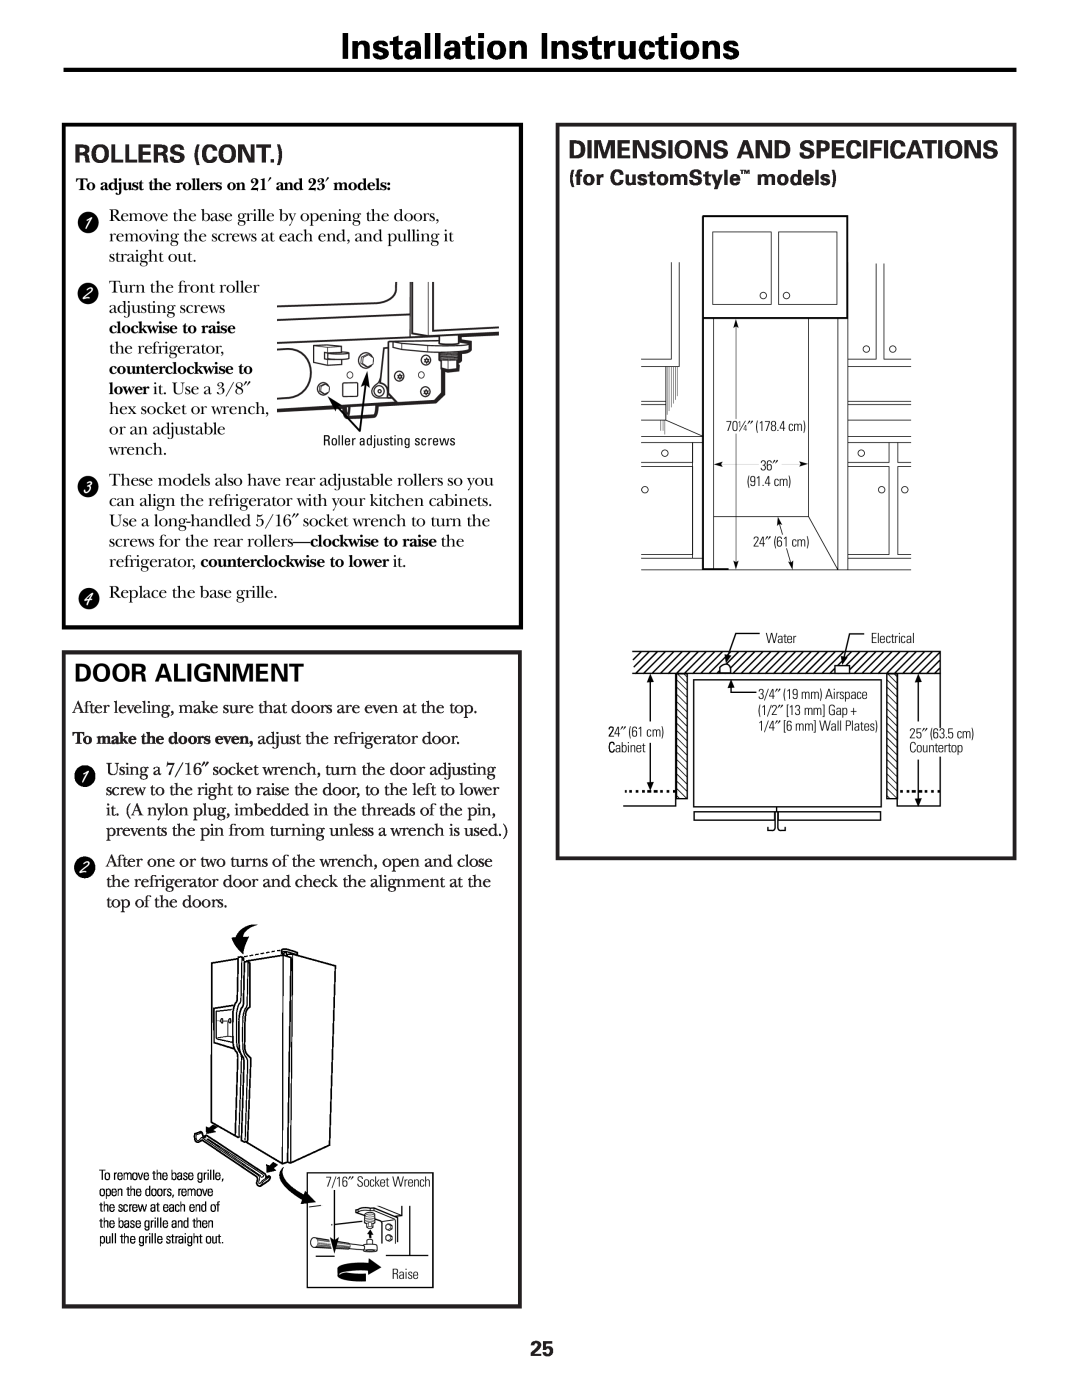 GE 200D2600P010 Installation Instructions, Rollers Cont, Dimensions And Specifications, Door Alignment 